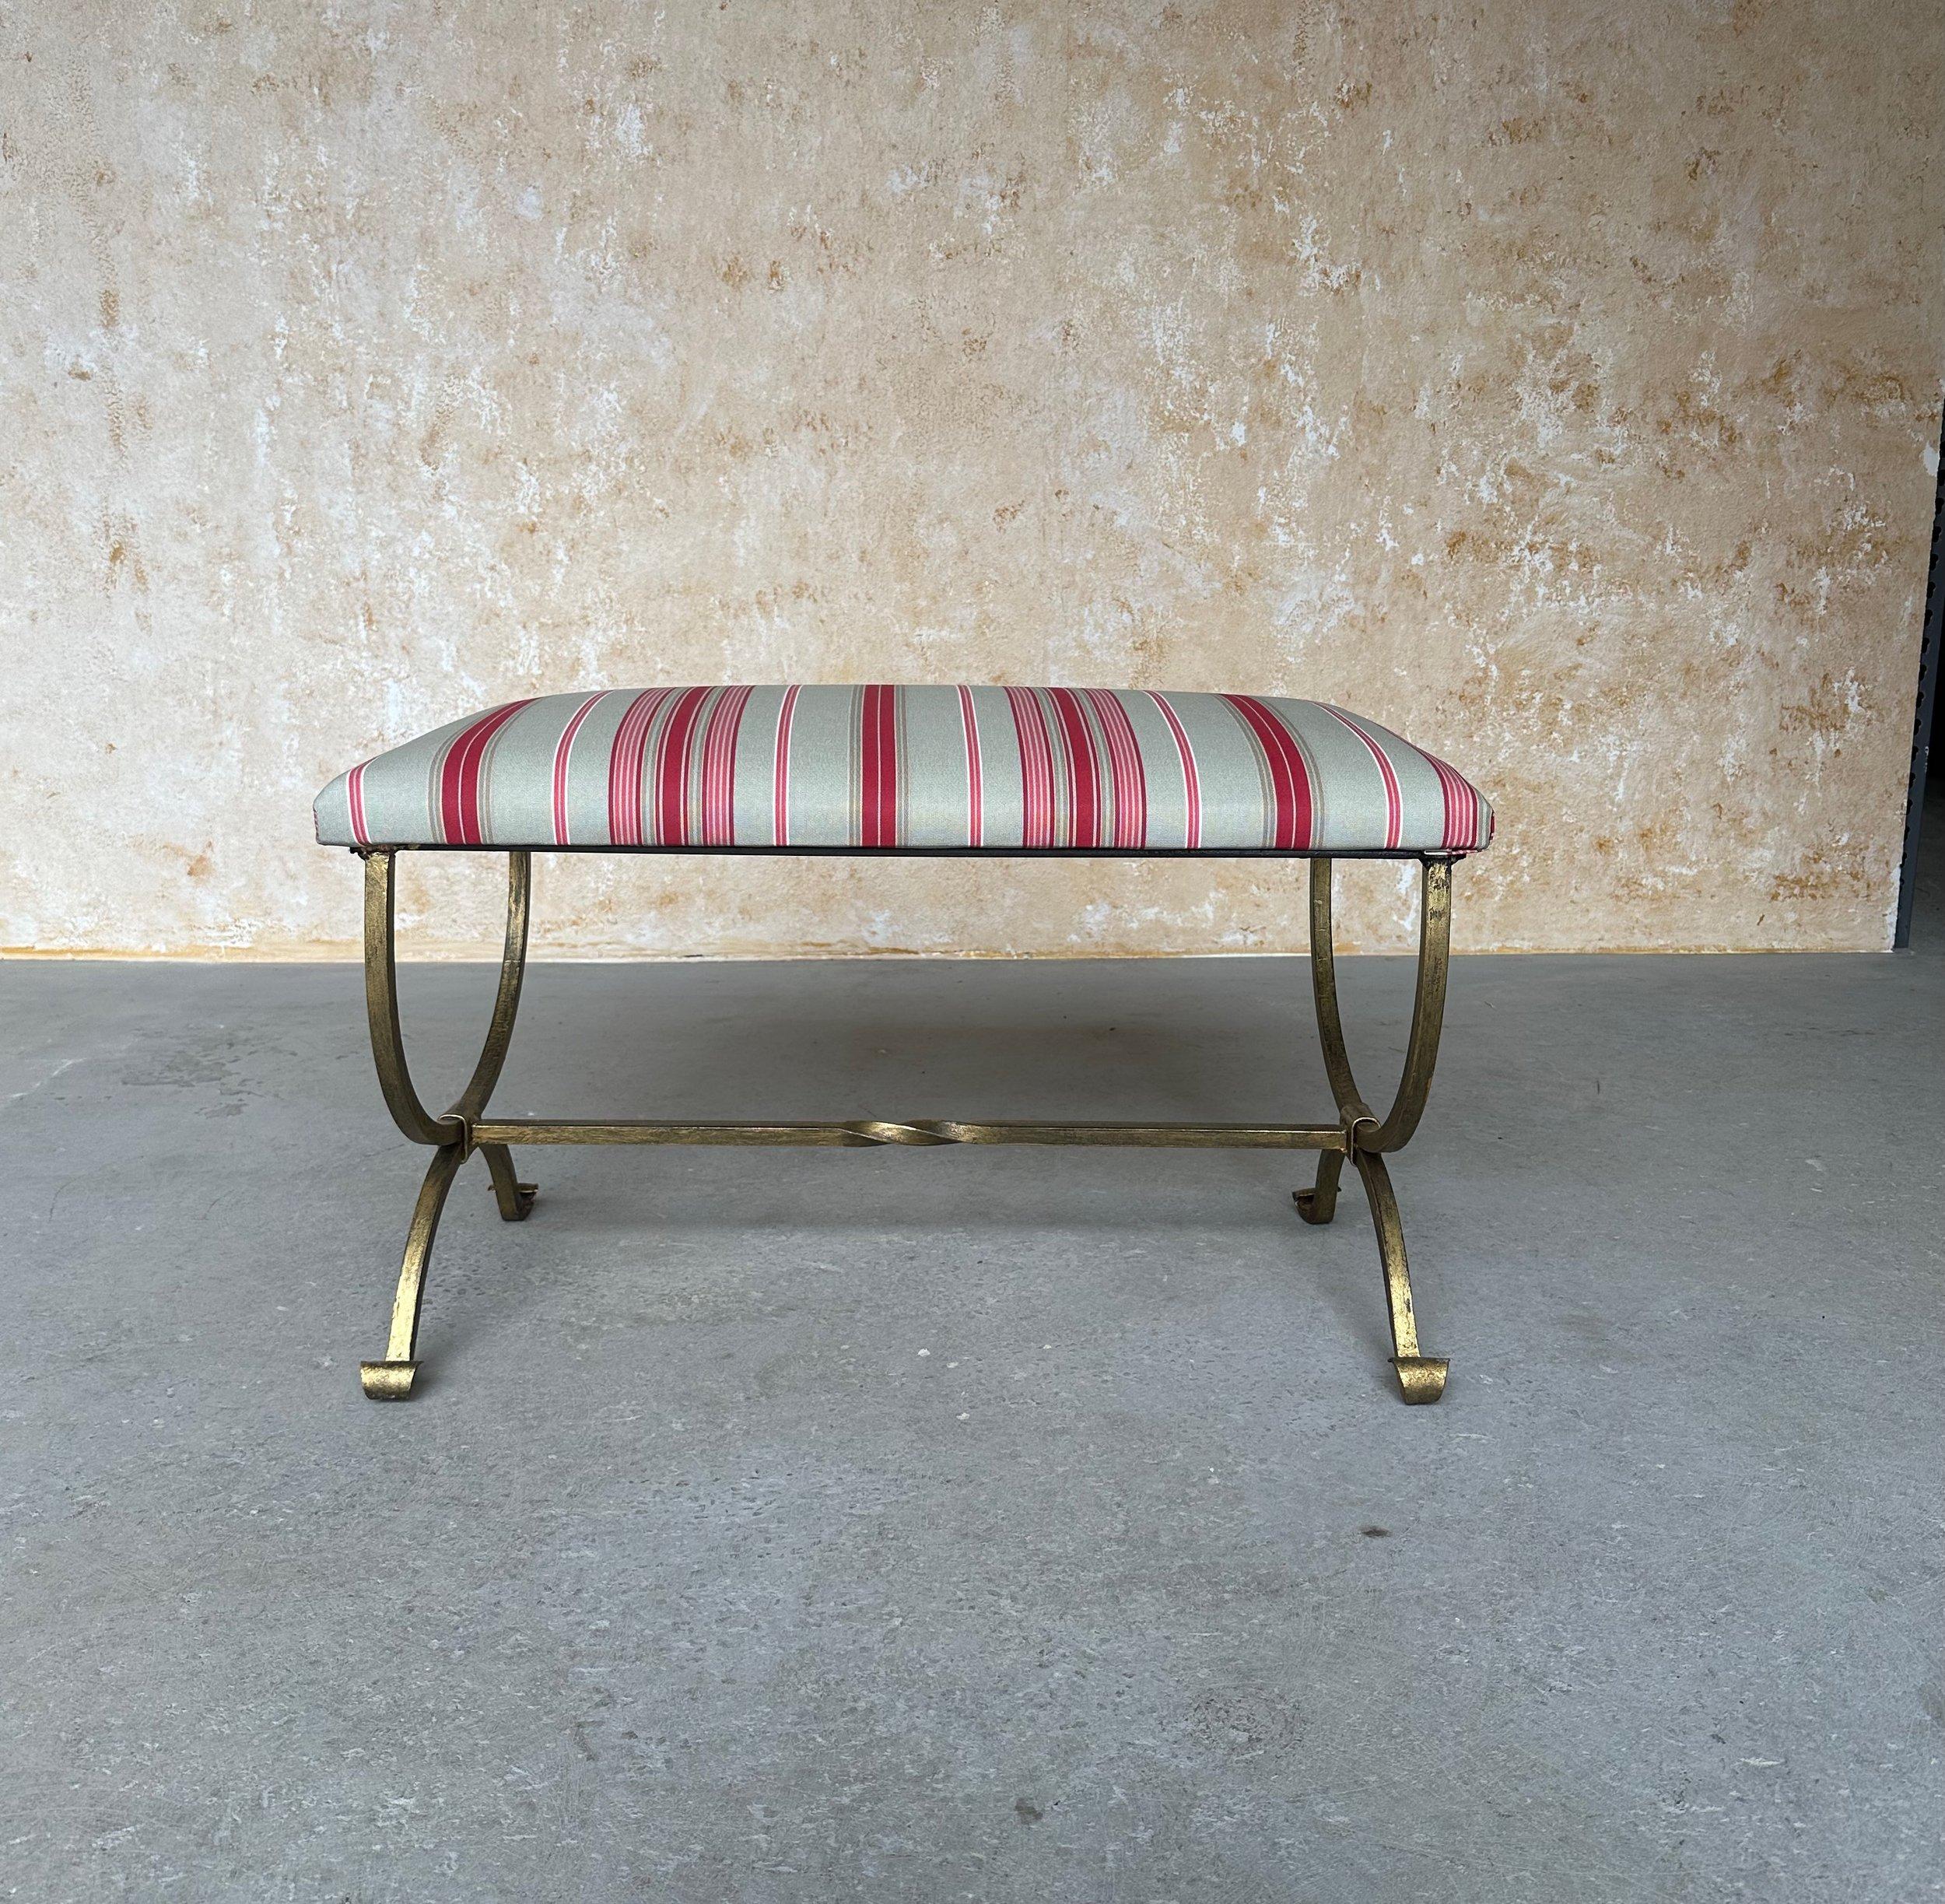 Hand-Crafted Spanish Iron Bench with Scrolled Legs For Sale